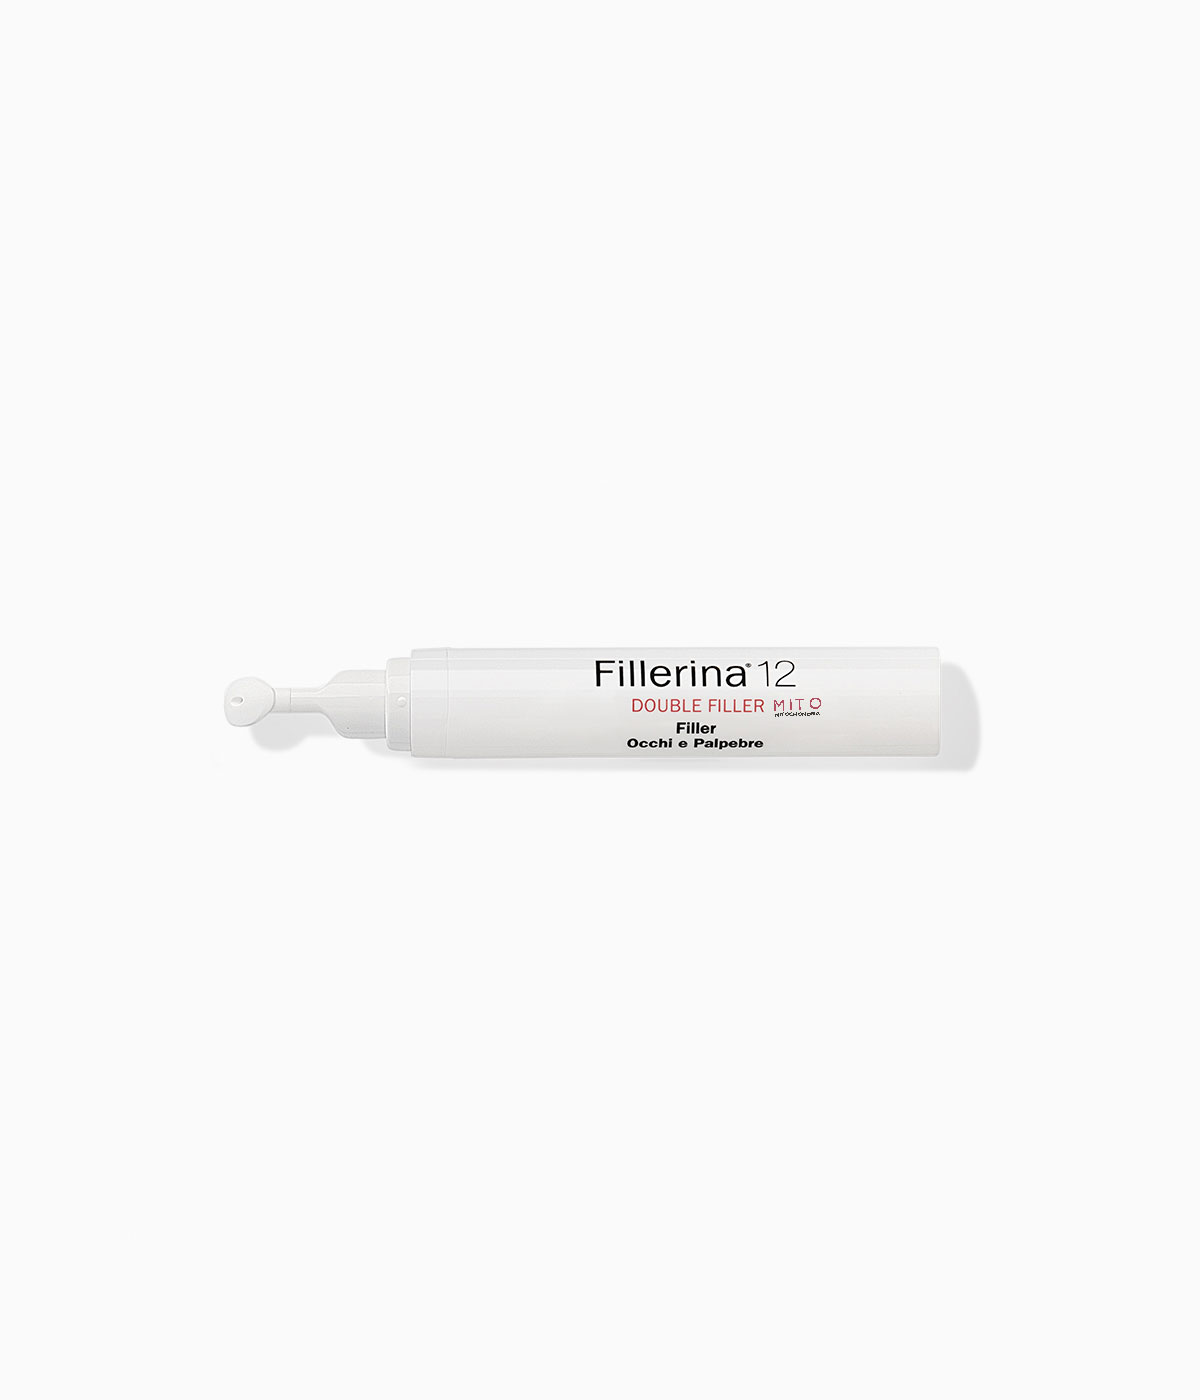 Fillerina 12 Double Filler MIT0 Eyes and Eyelids 15ml